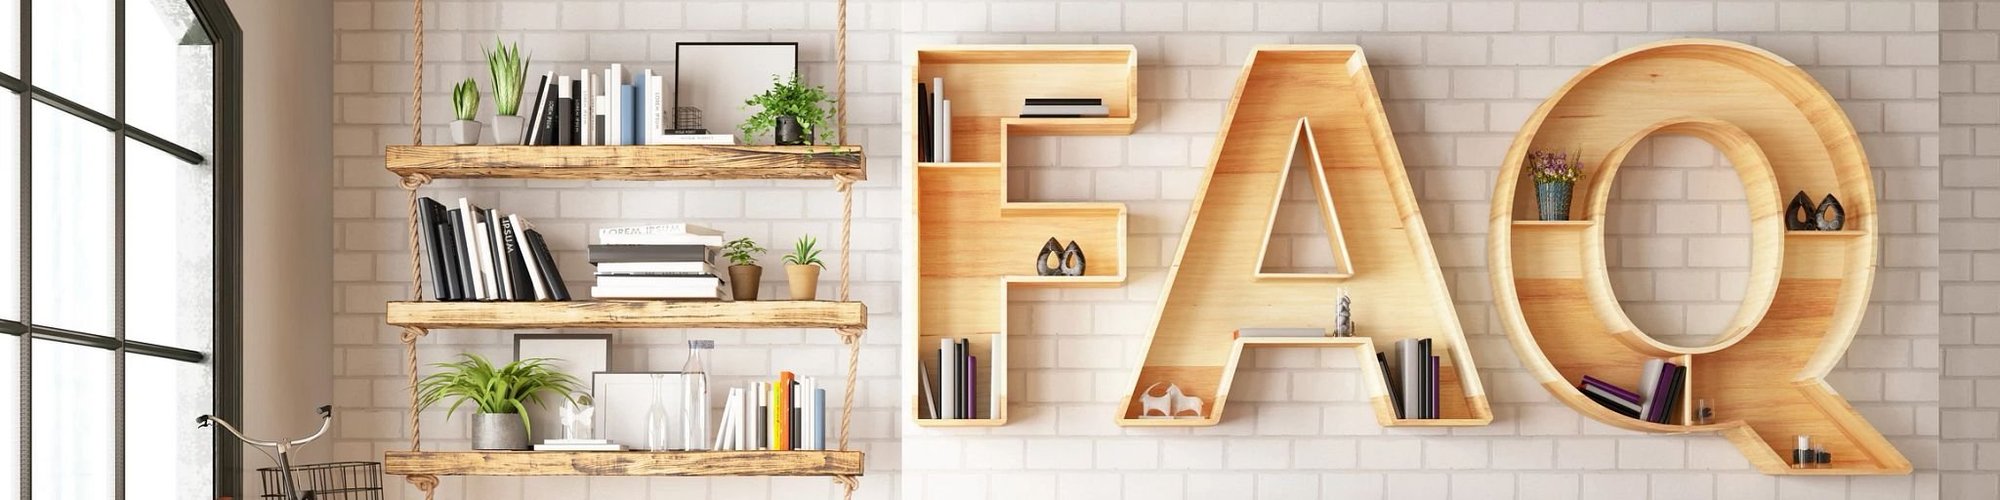 room wall with wood shelving in shape of letters FAQ - RIckway Carpet in North Mankato, MN